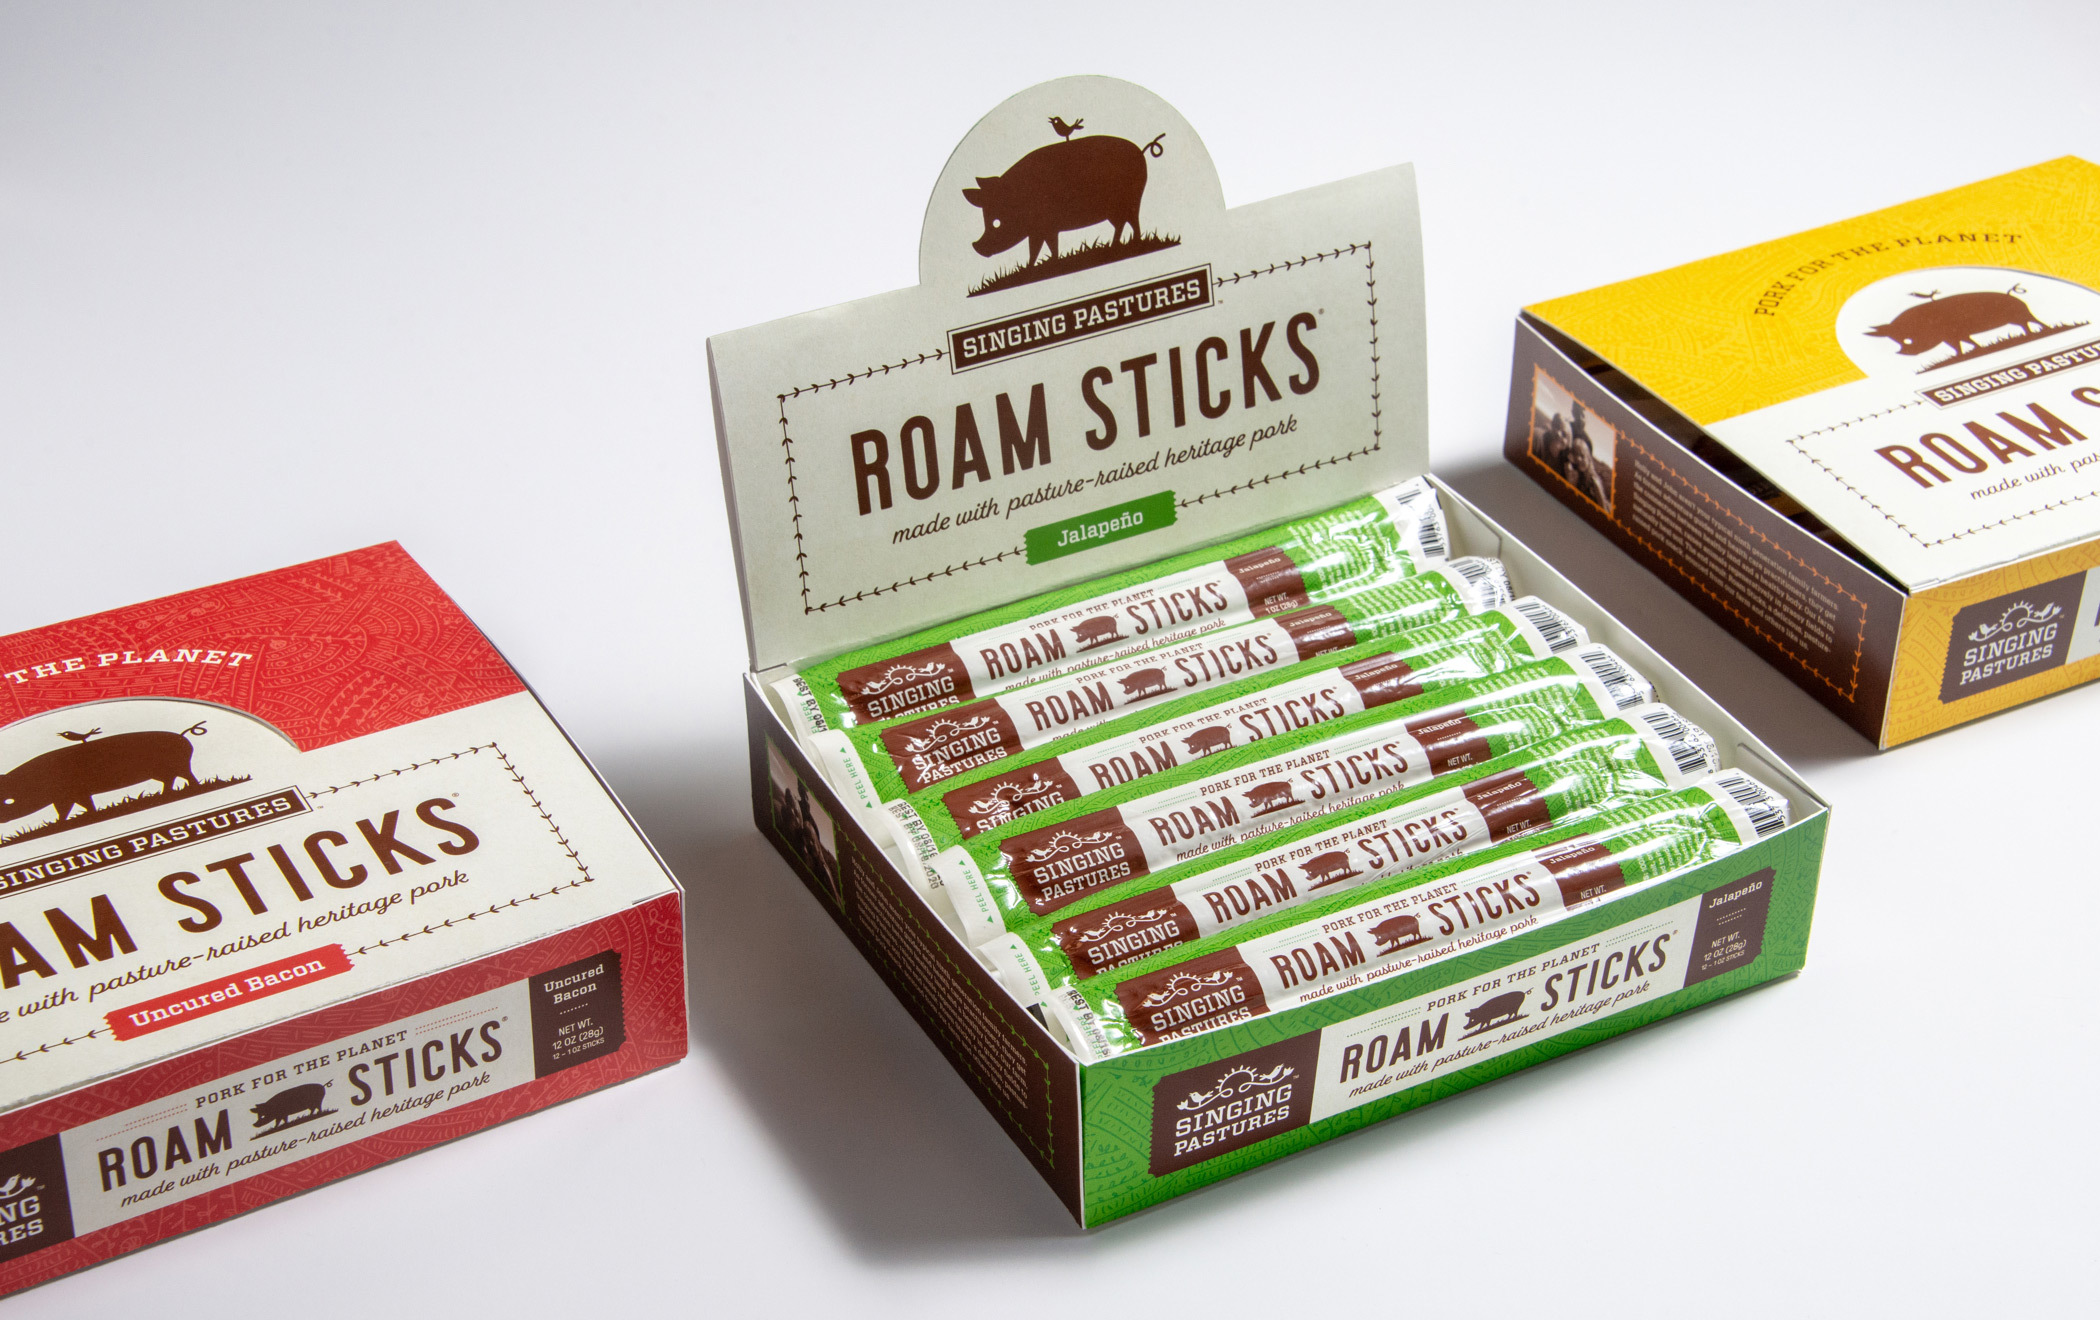 Three boxes of Singing Pastures Roam Sticks snacks arranged on a table. One is open showing individual Roam Stick packages 